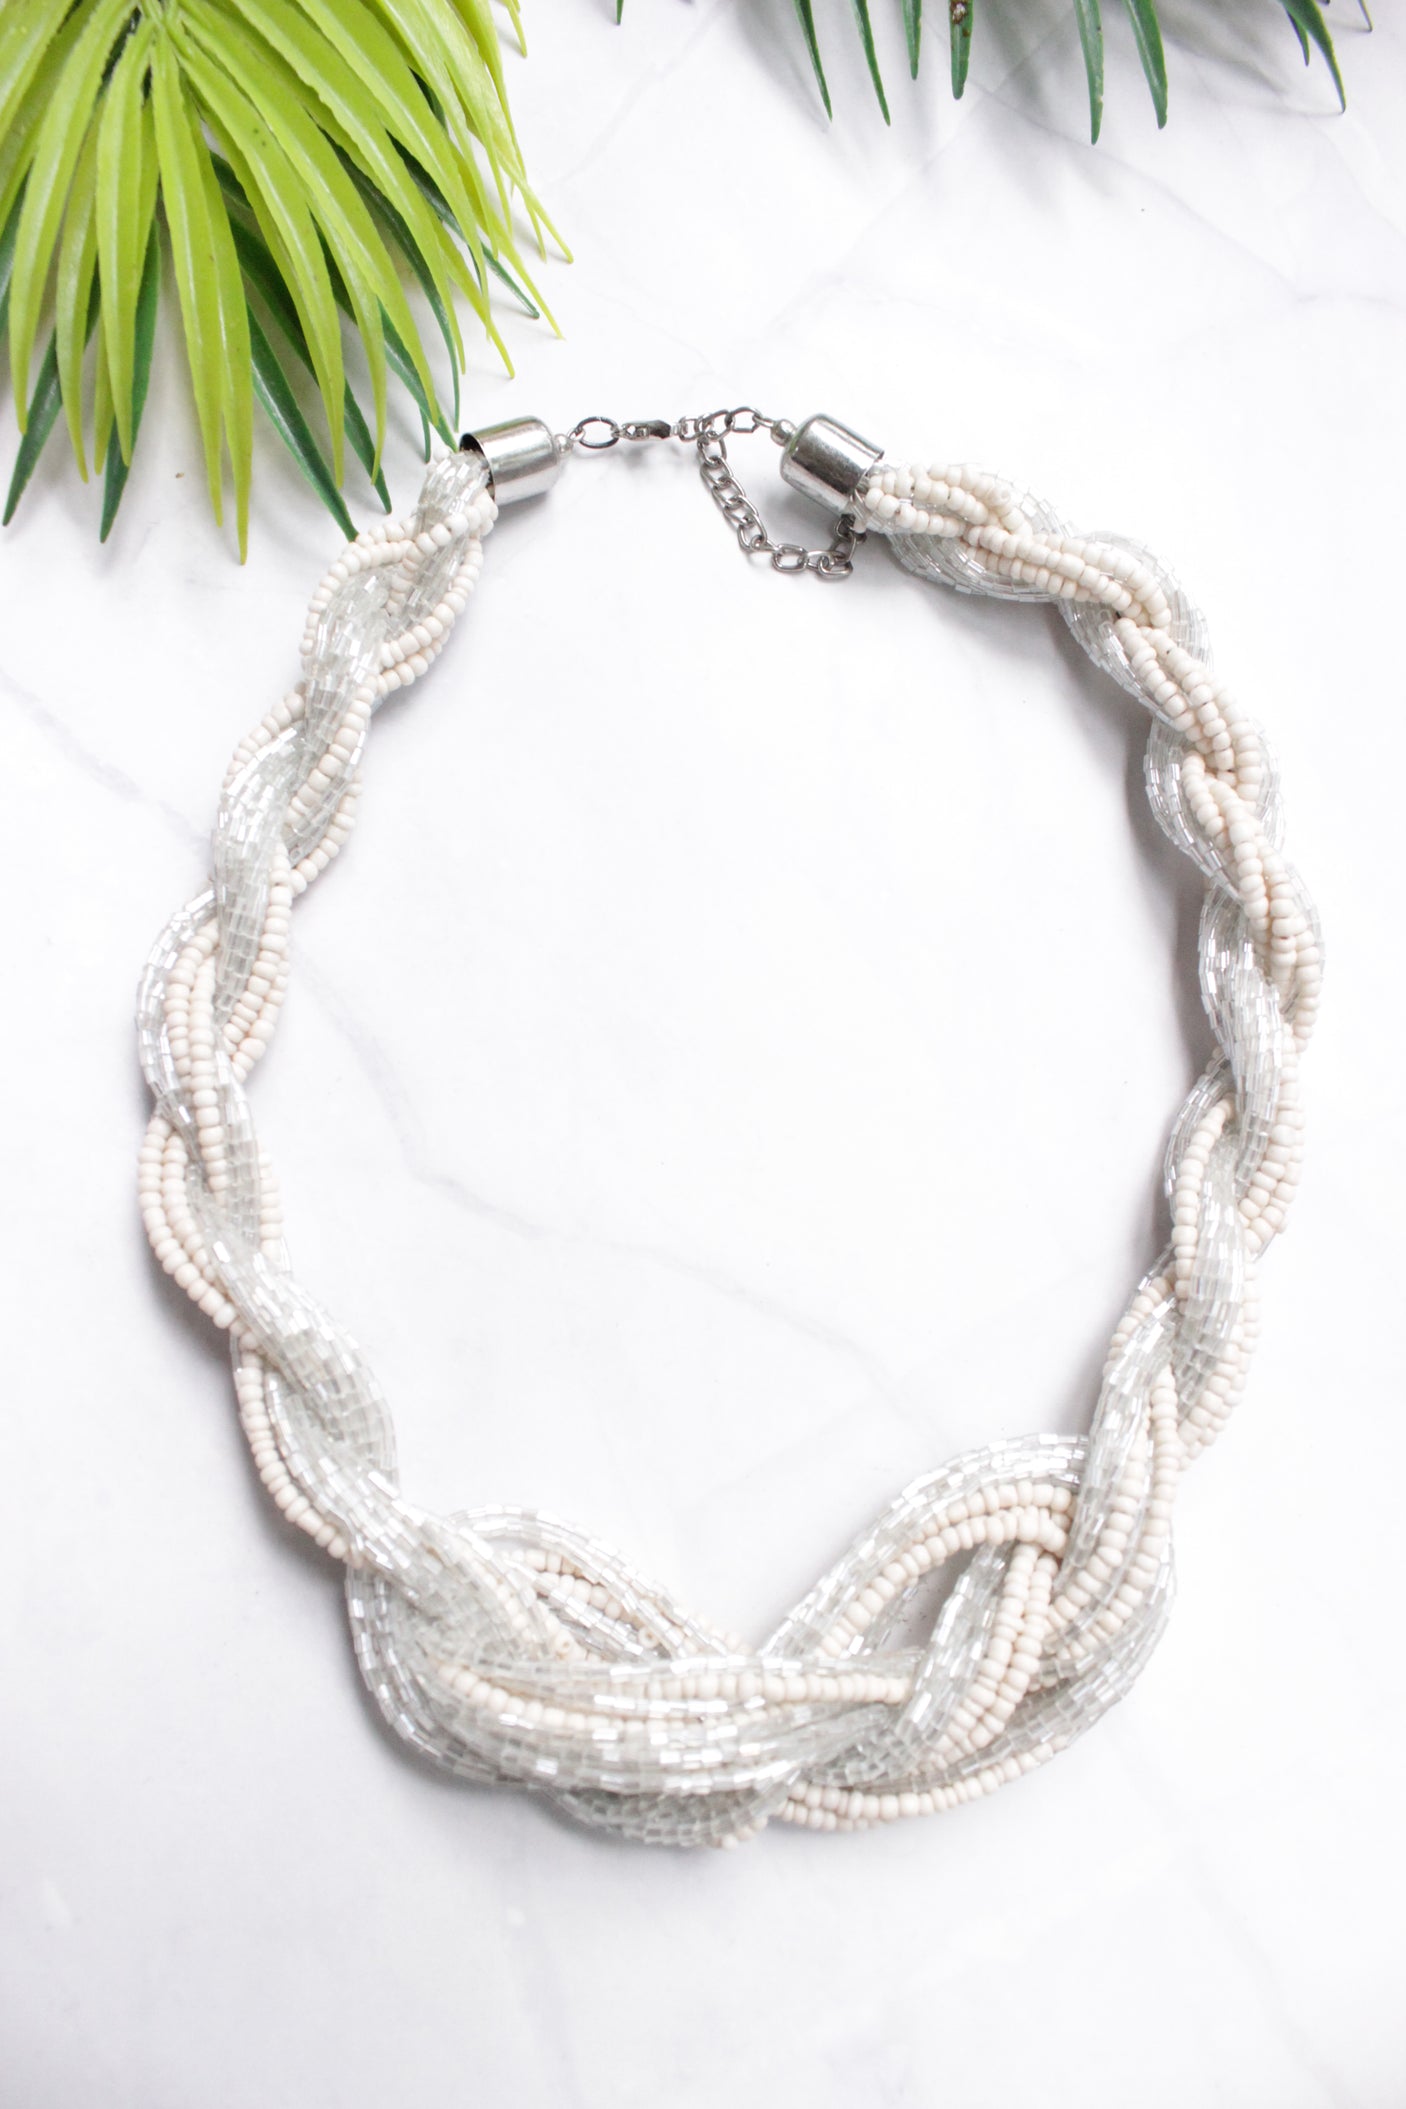 Ivory Acrylic Beads and Glass Beads Twisted Handmade Necklace